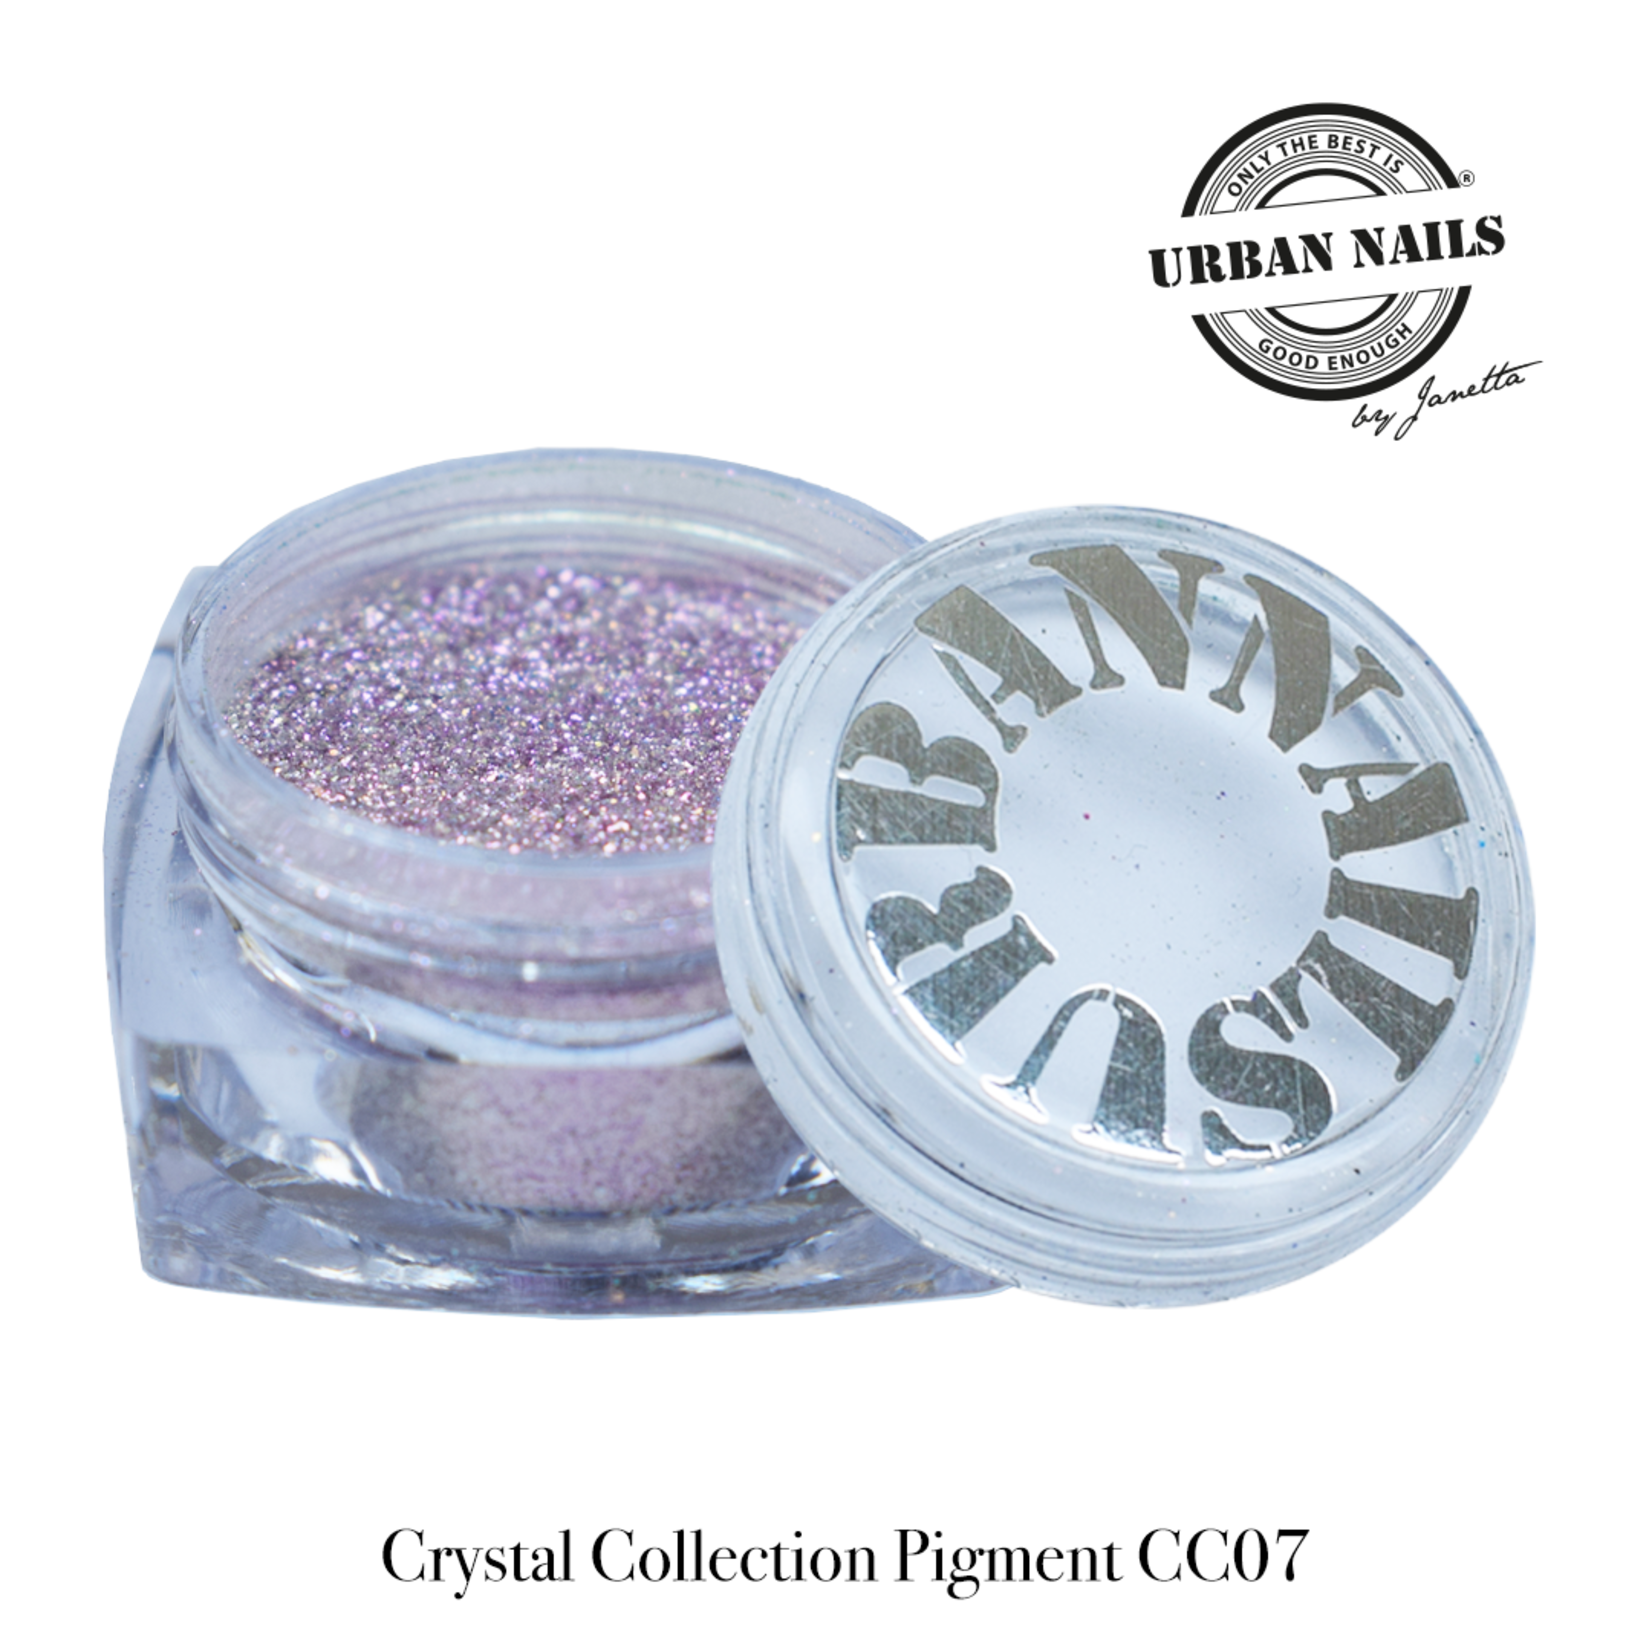 Urban Nails Crystal Collection Pigments